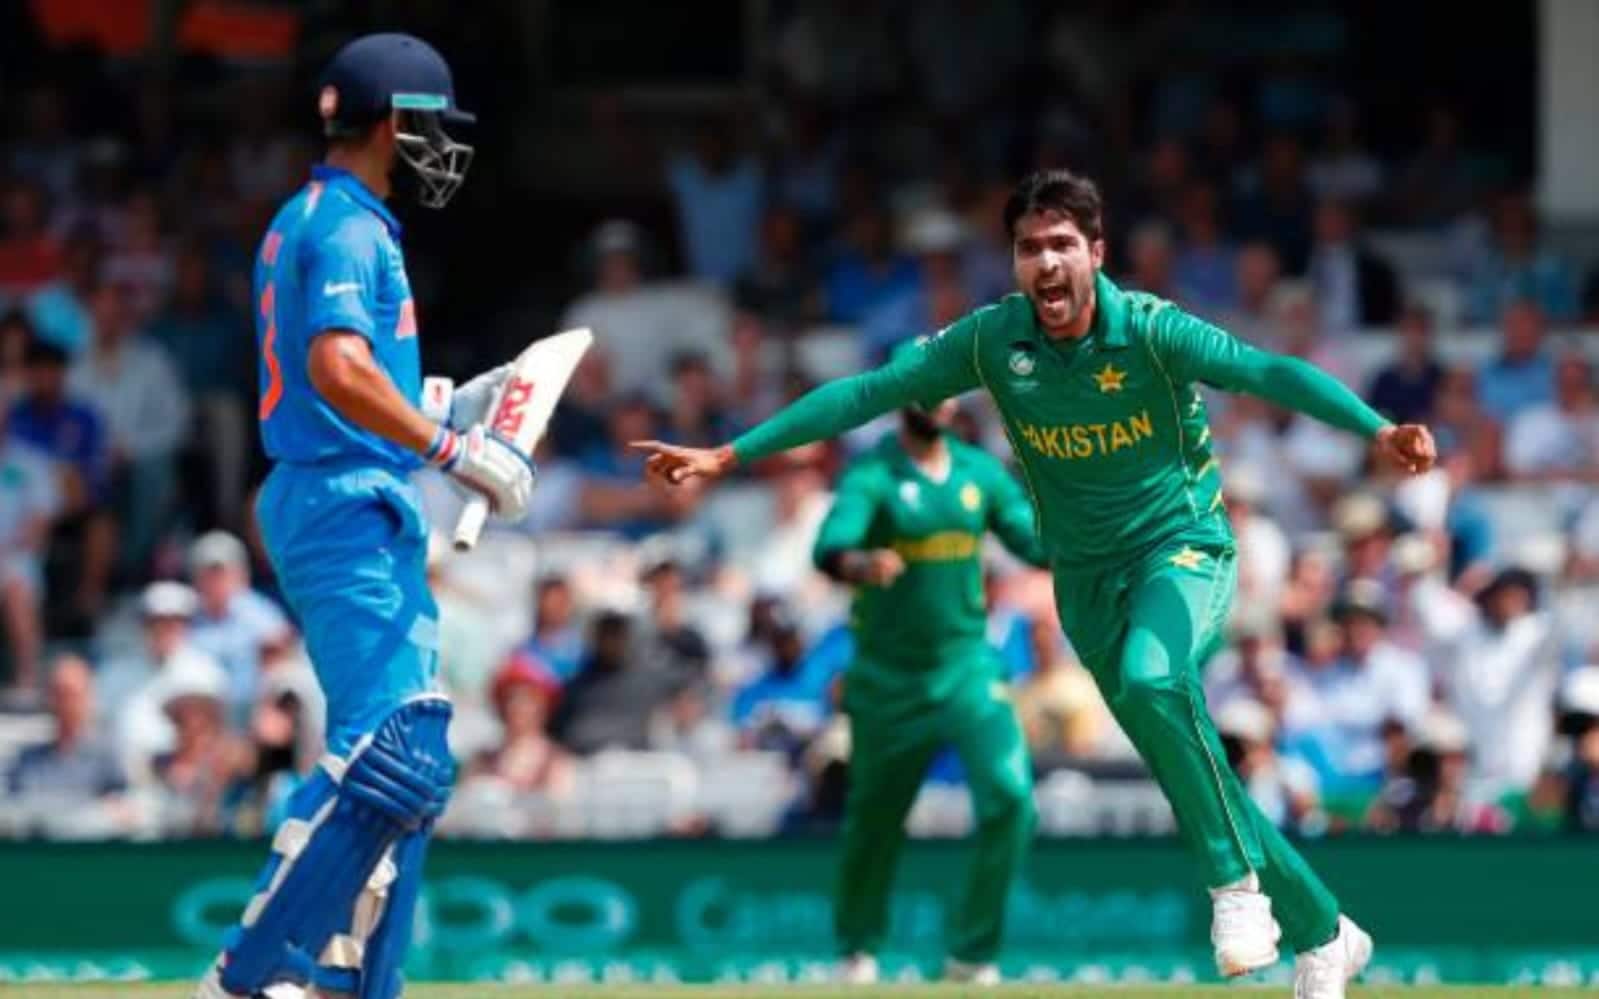 Mohammad Amir reduced India to 33/3 single-handedly [x.com]